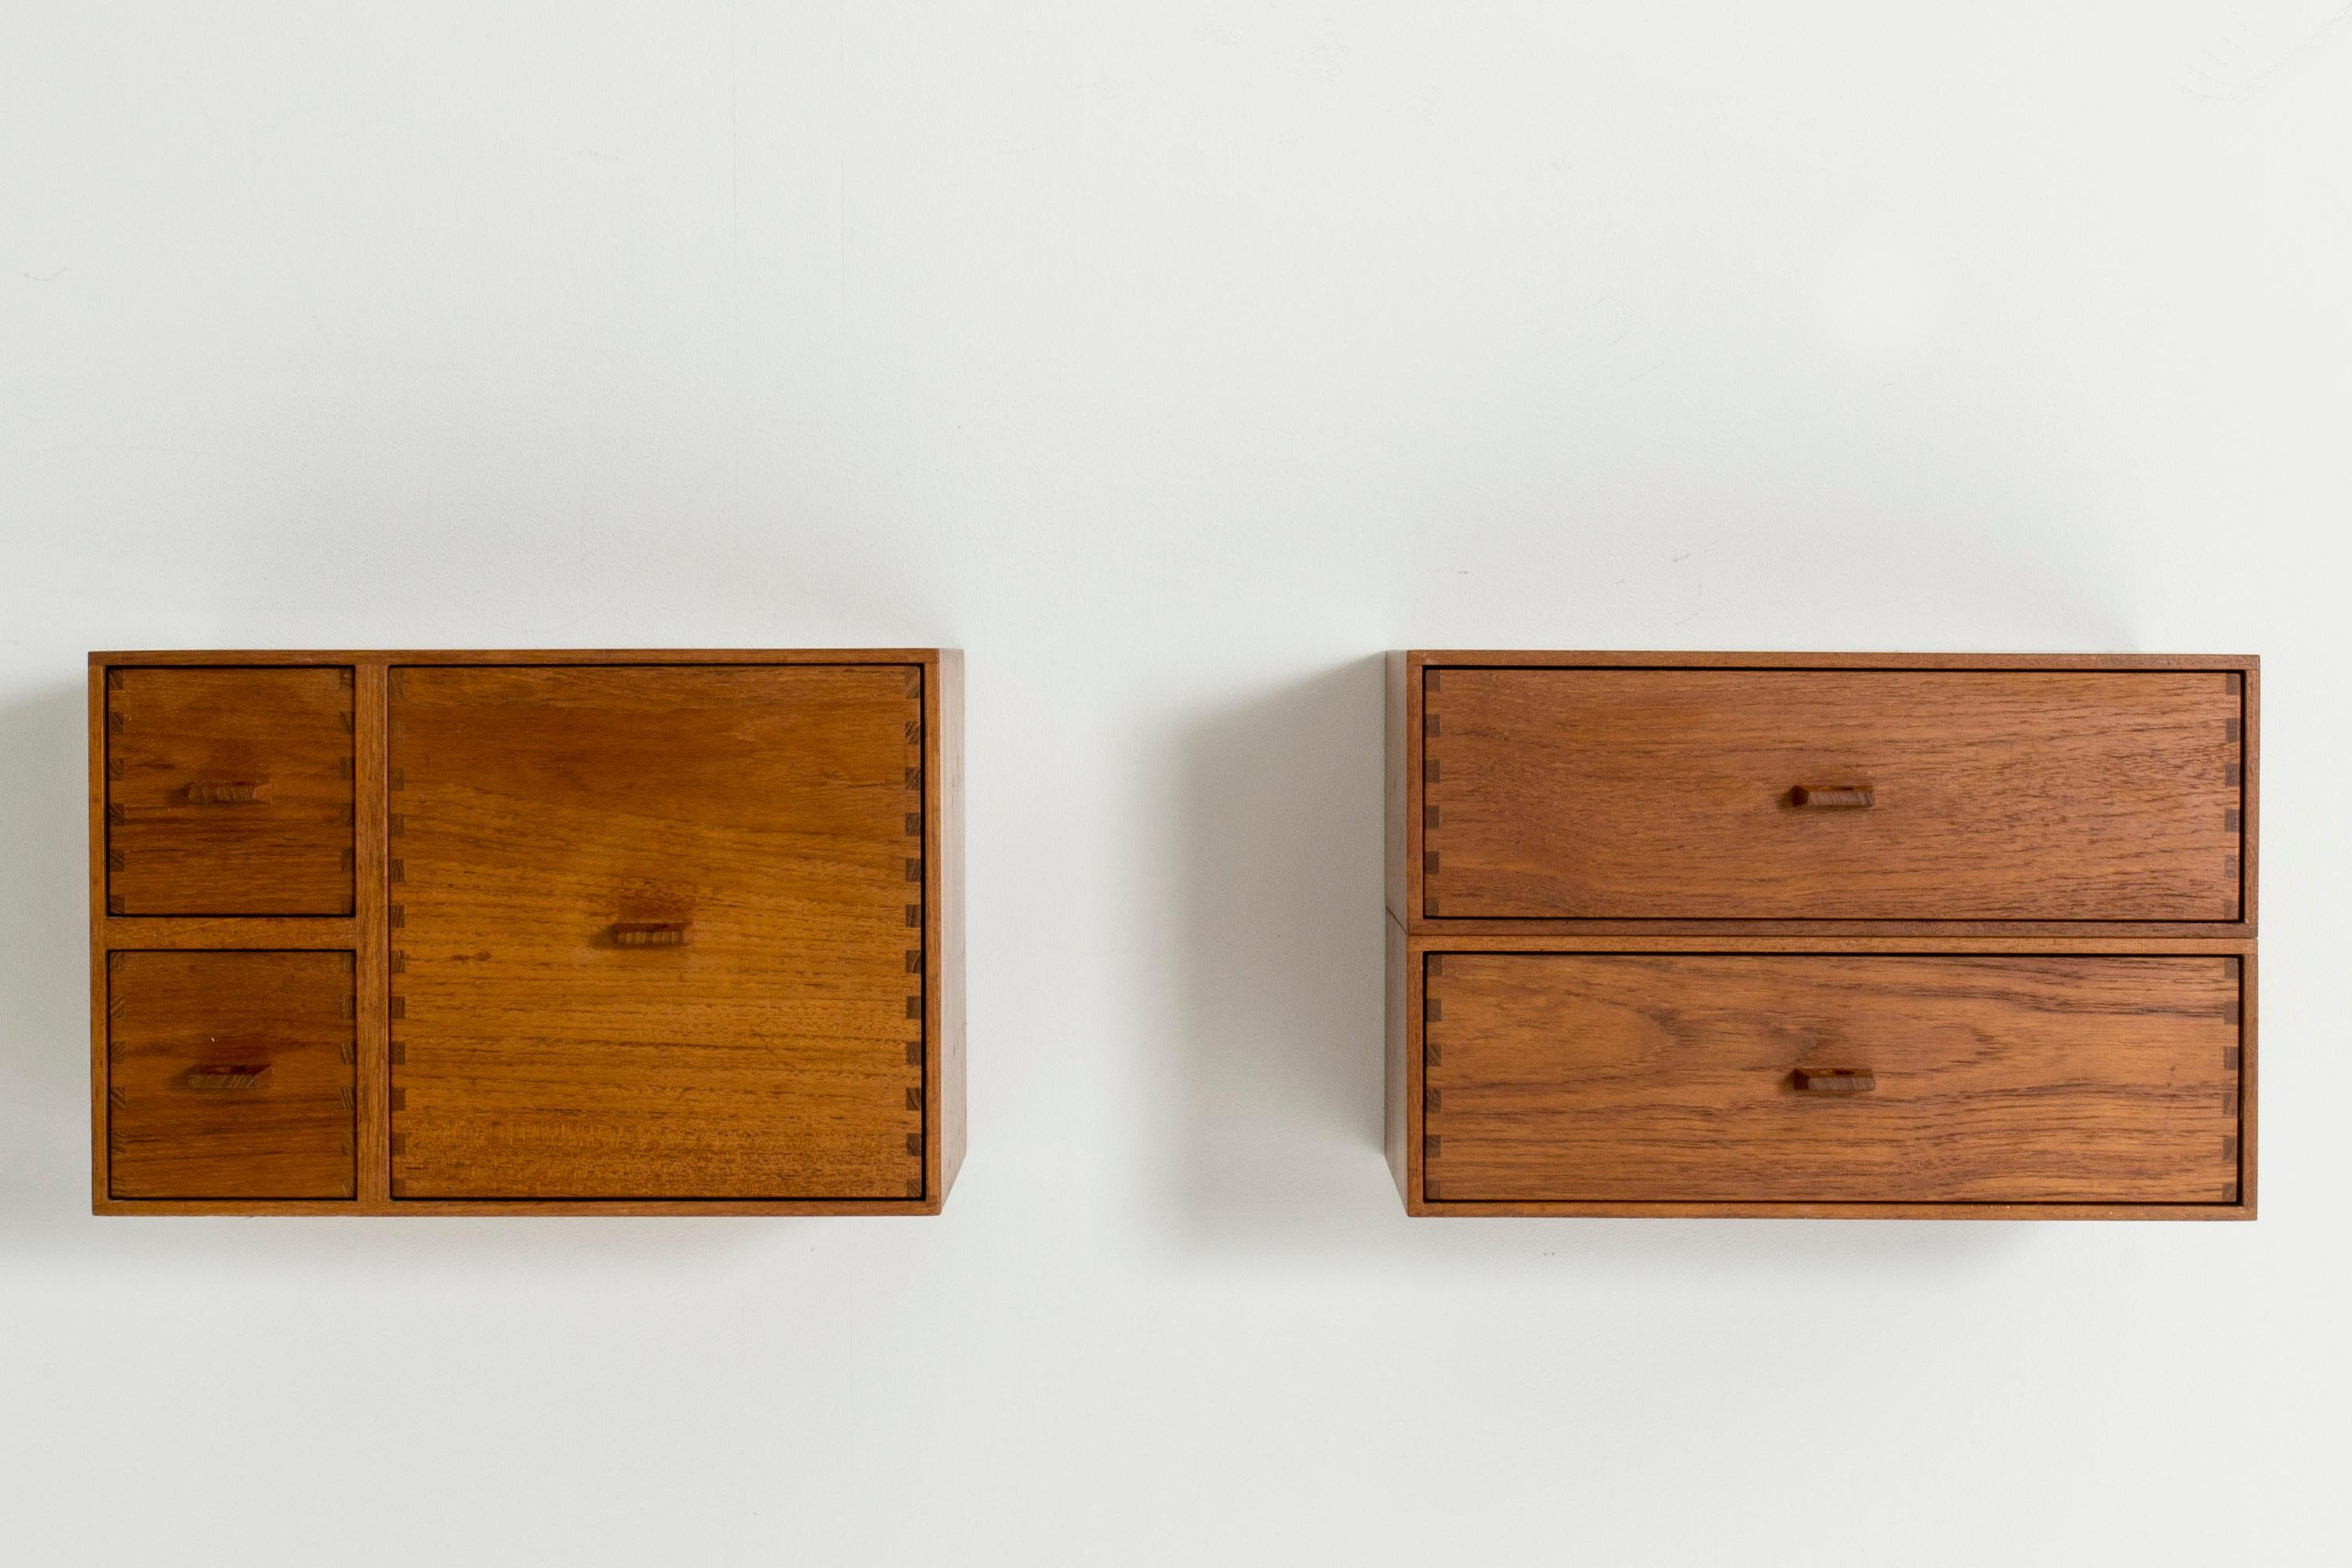 Pair of wall-mounted shelves by Uno and Östen Kristiansson, made from teak. One has two drawers, the other three. Perfect as bedside tables. Cool proportions, beautiful handles and decorative joinery in the corners.